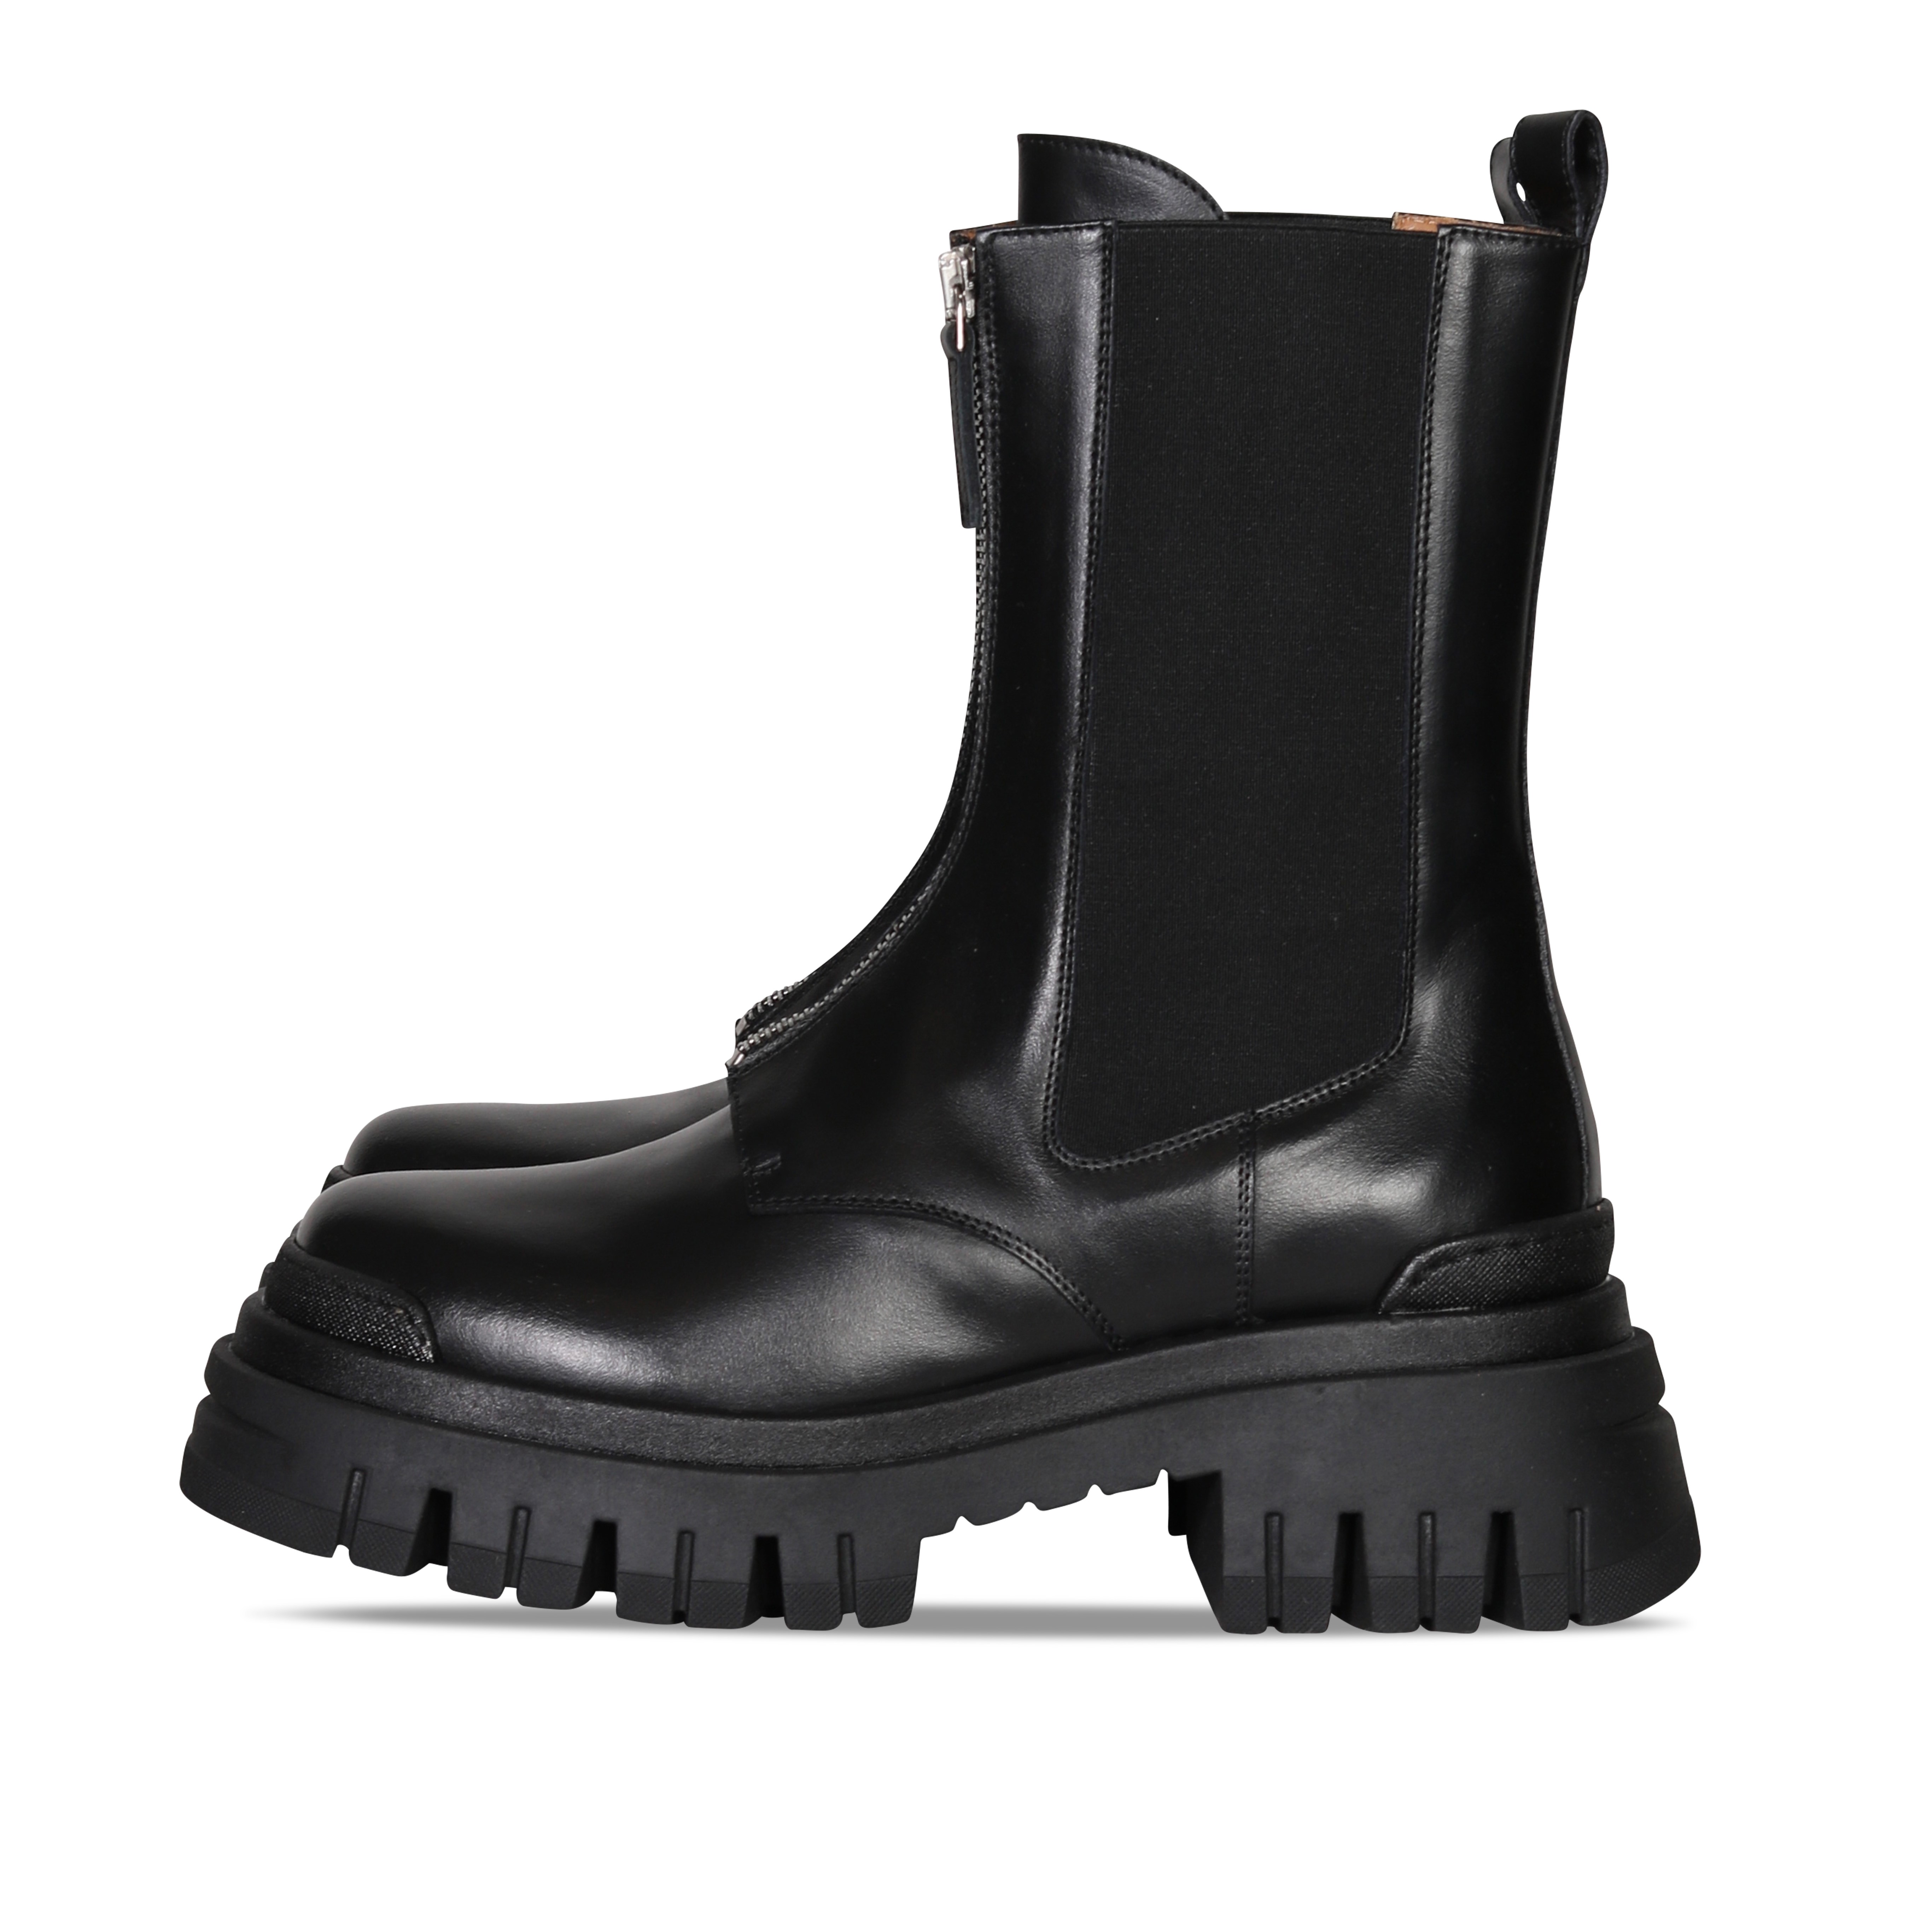 Ennequadro Combat Boots in Black with Zip